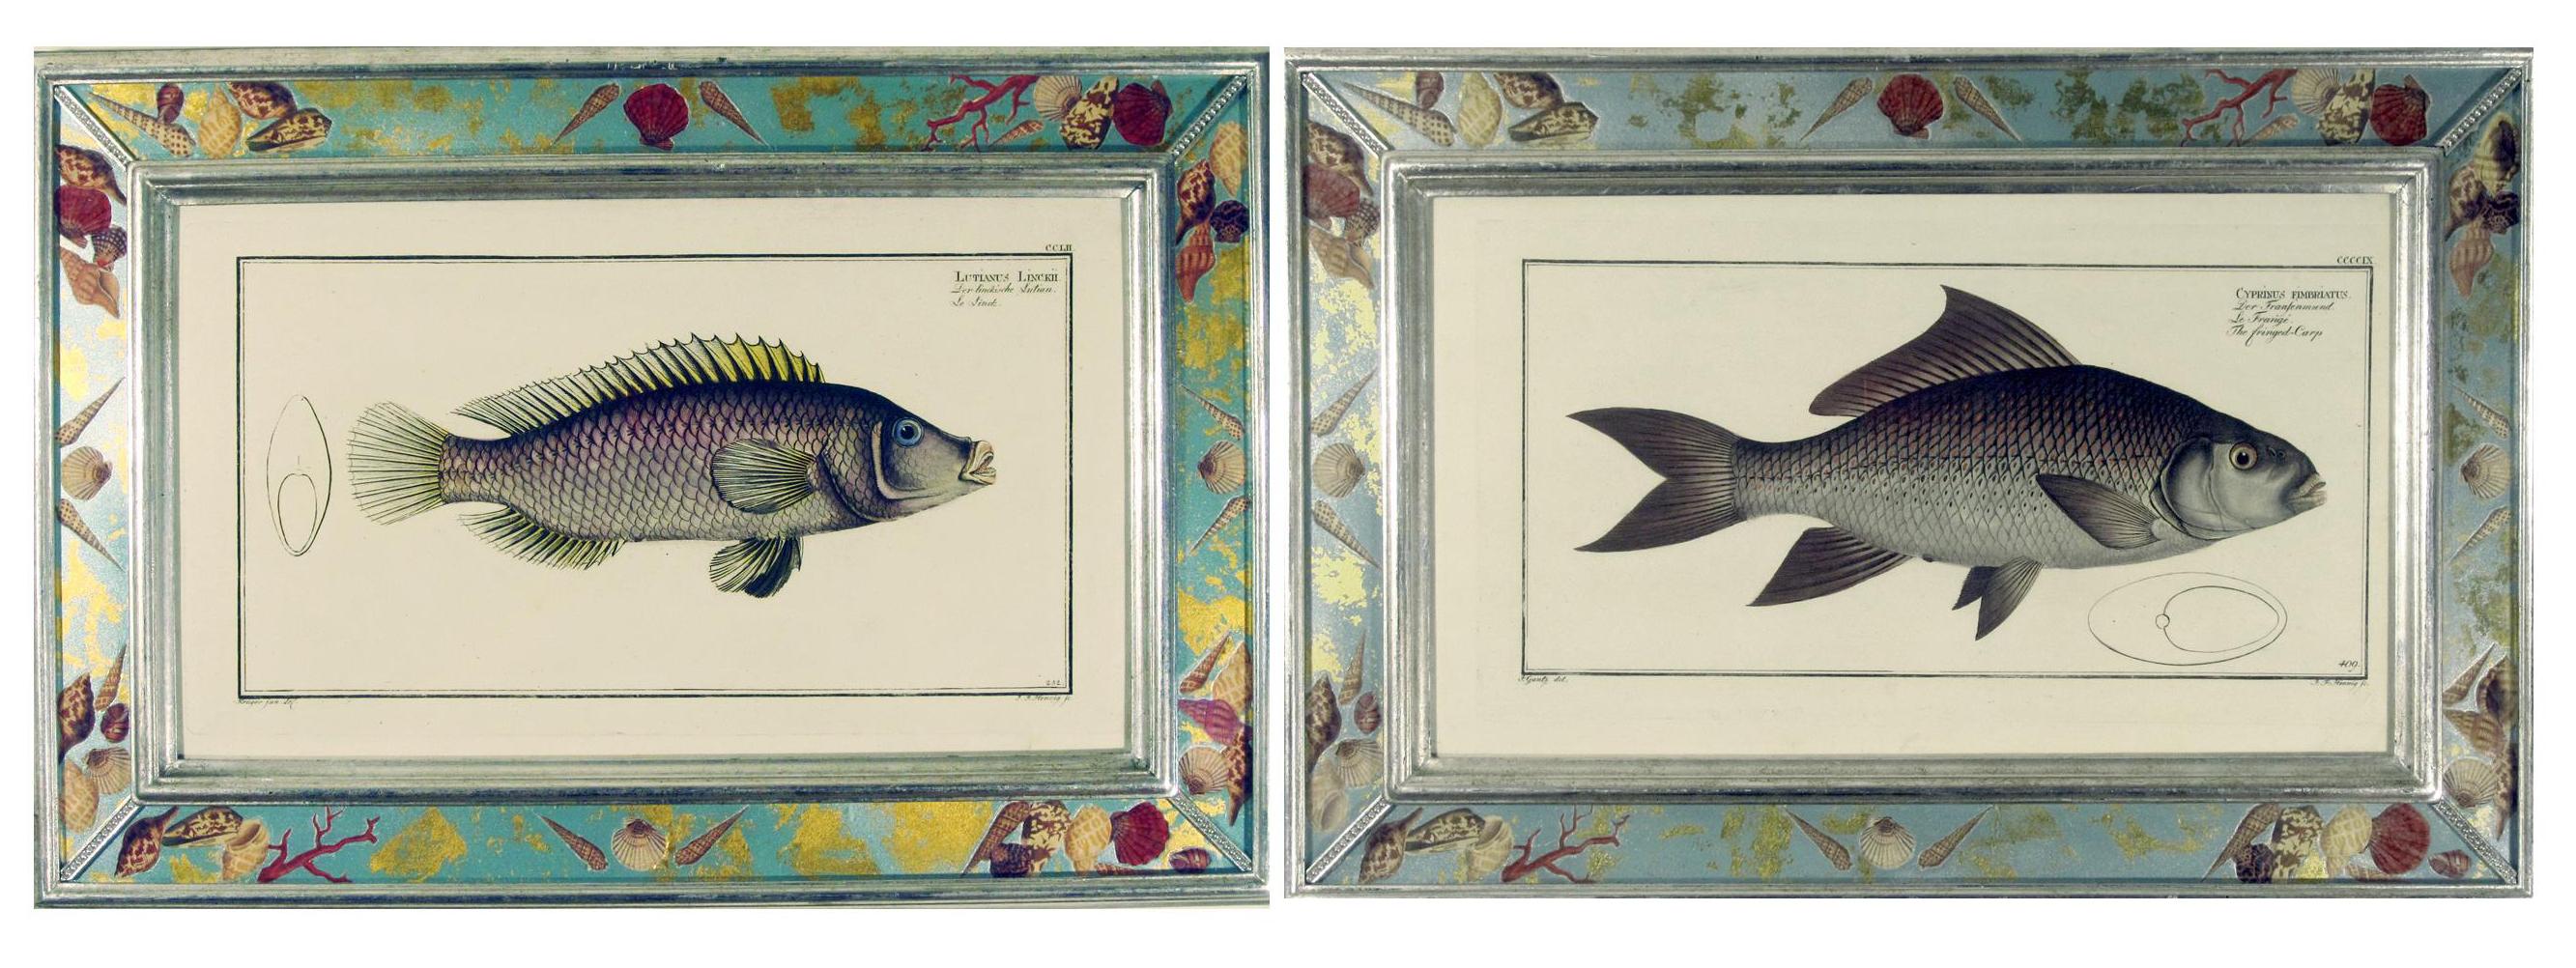 Paper 18th century Engravings of Fish by Marcus Bloch For Sale